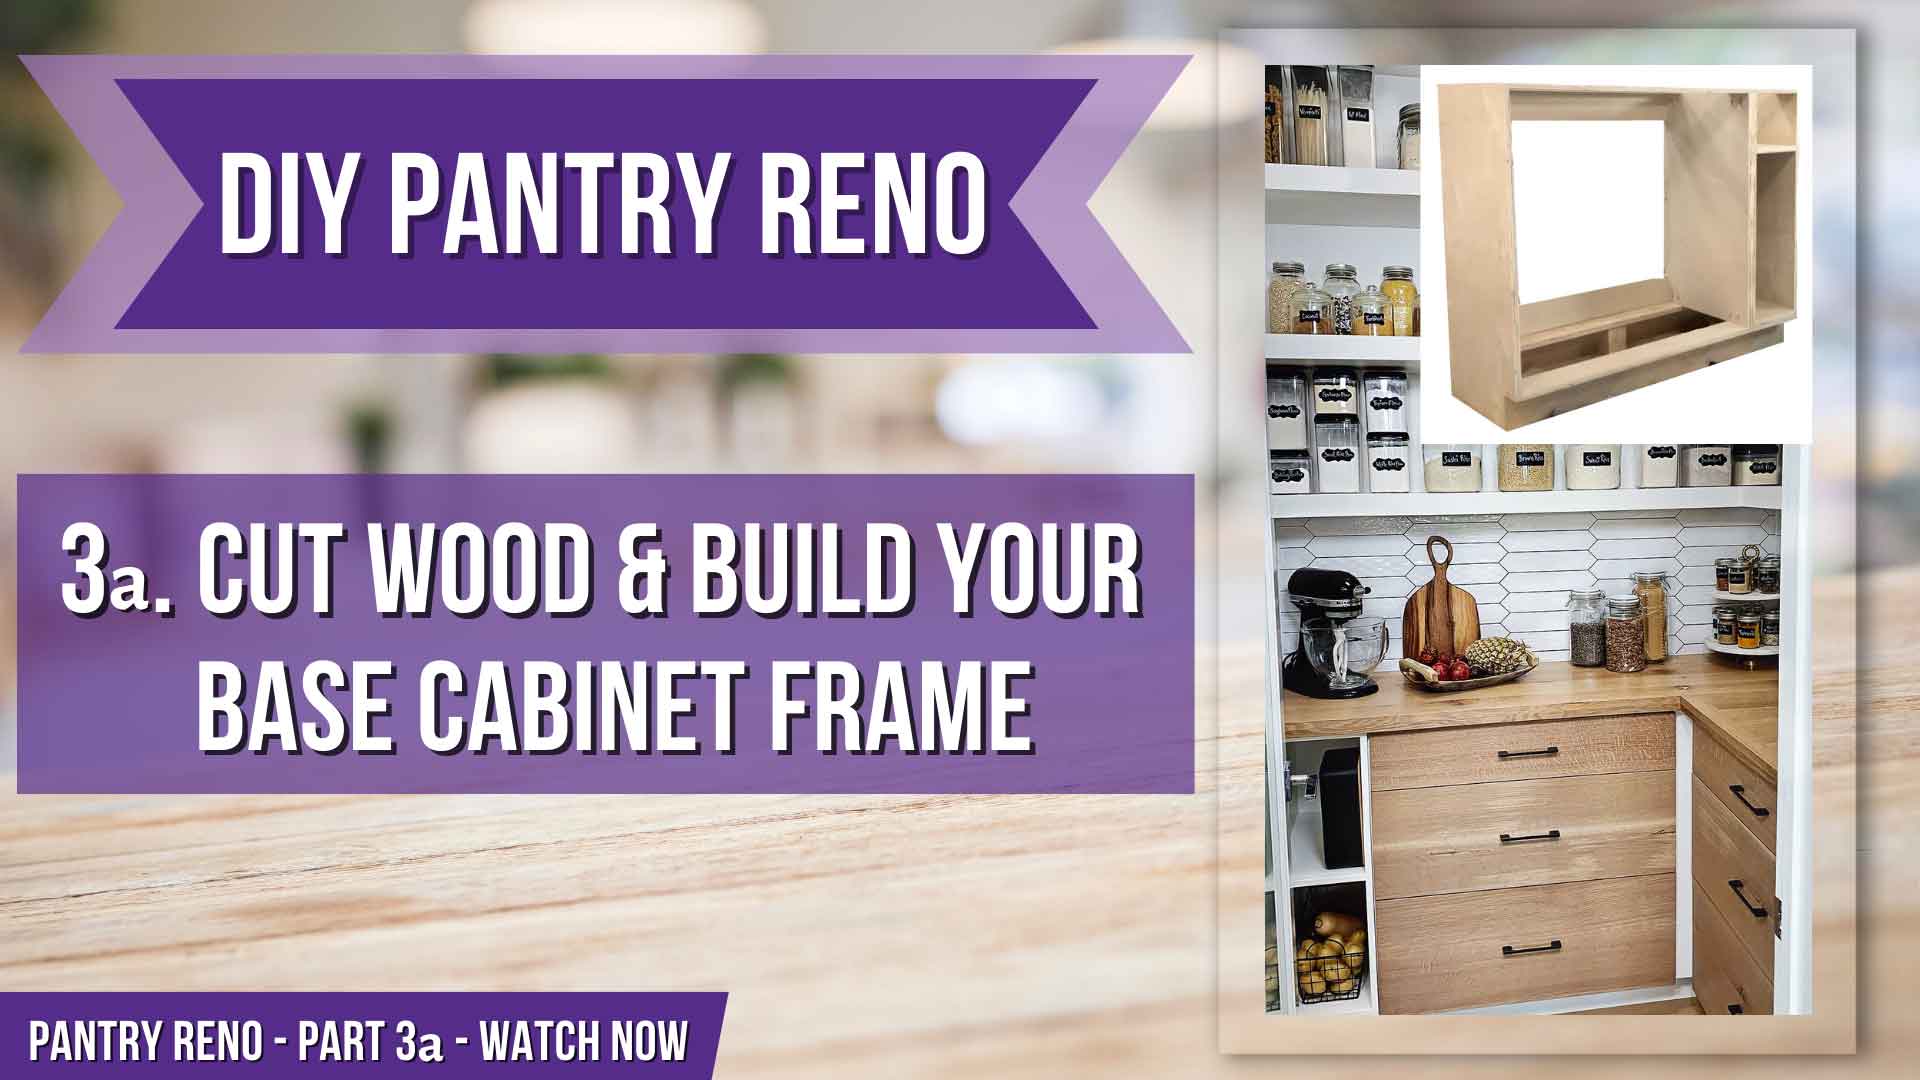 We will show you exactly how we created the most perfect Kitchen Pantry! DIY kitchen renos, pantry renovation, DIY kitchen renos, pantry design pantry inspiration pantry idea, pantry renos, DIY butlers pantry, diy, DIY cabinet with drawers, DIY kitchen base cabinet, diy kitchen renos, DIY pantry reno, DIY projects, DIY renos, diy kitchen, butlers pantry, kitchen base cabinet frame